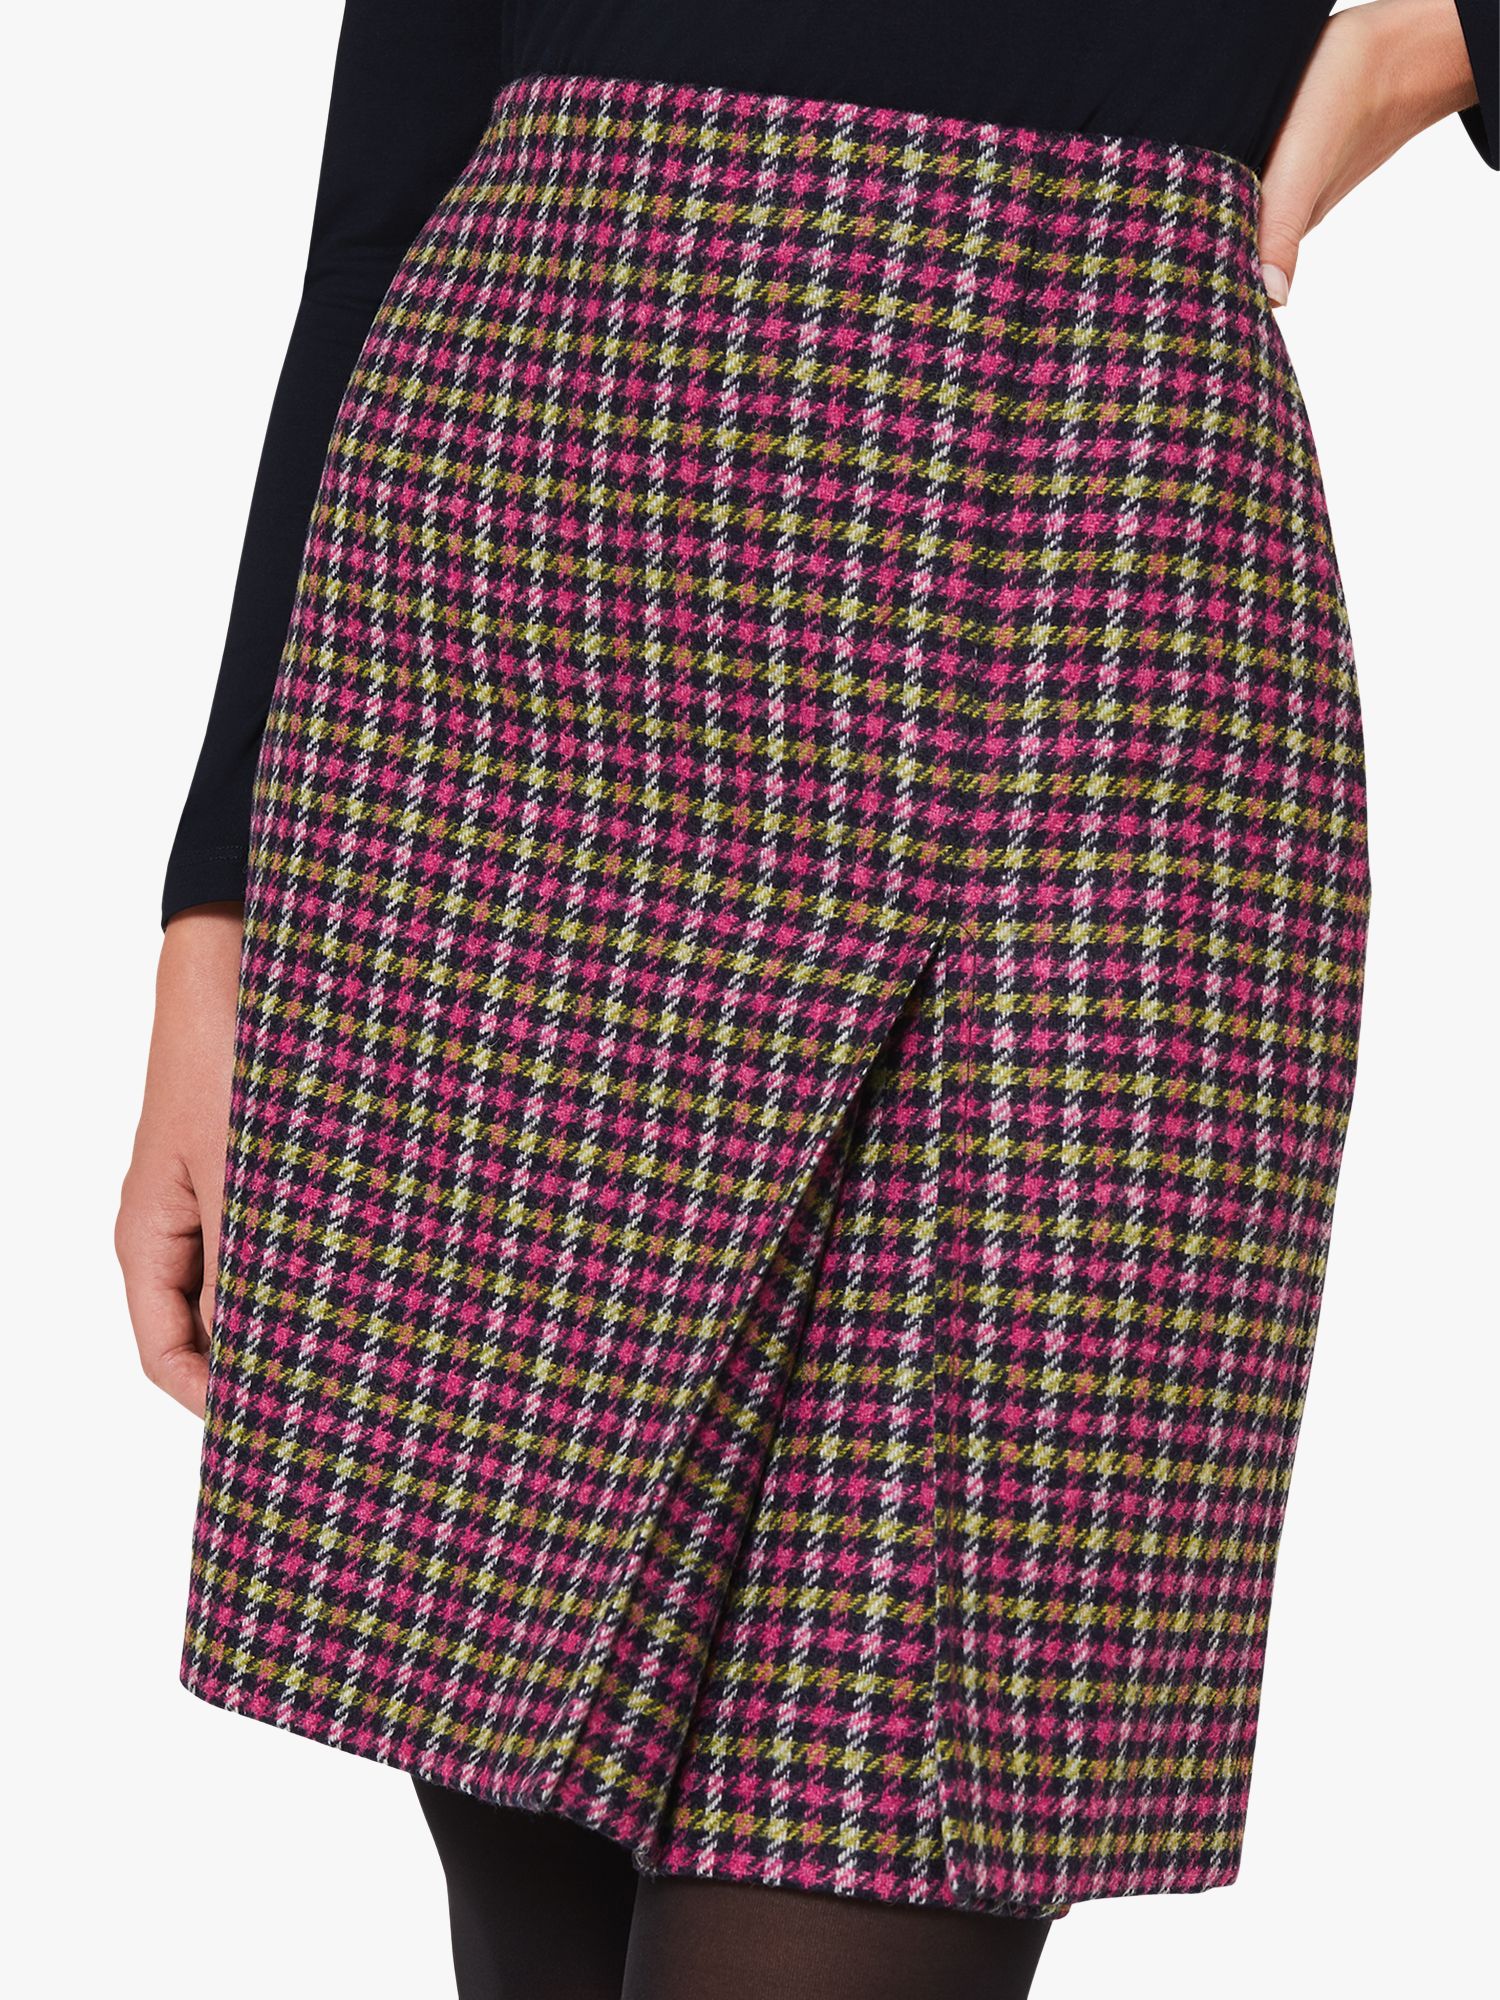 Hobbs Avery Pleat A-Line Checked Wool Skirt, Pink/Lime Green